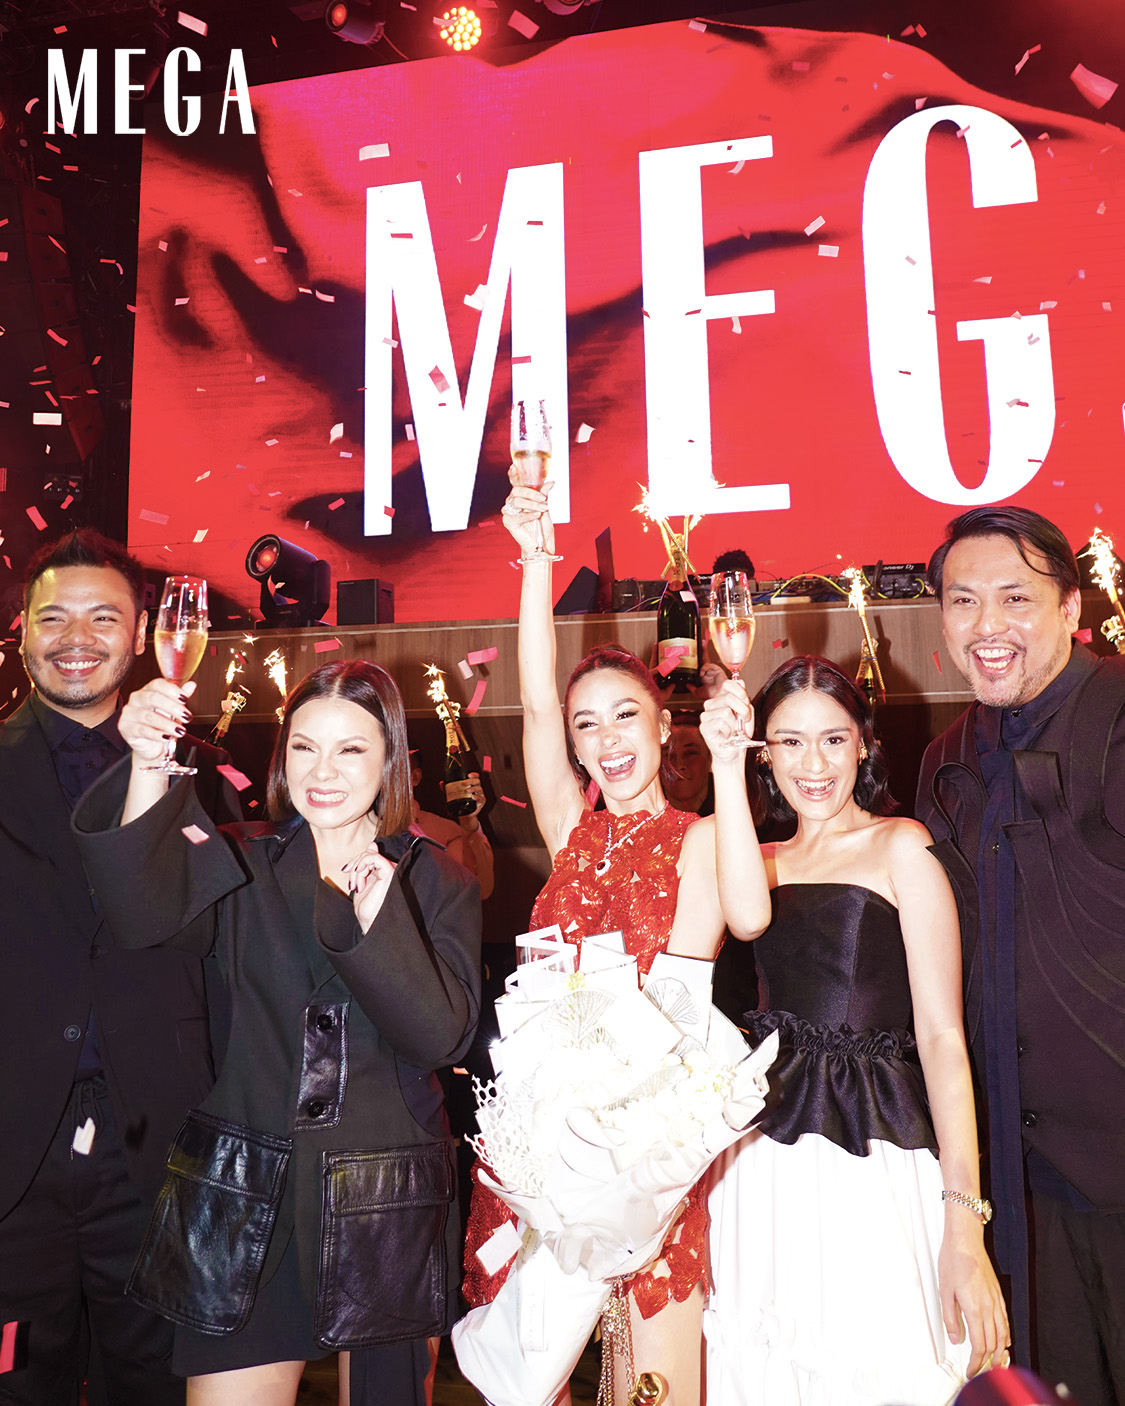 MEGA Creative Chief Patrick Ty, Editor-in-Chief Peewee Reyes-Isidro, Heart Evangelista, Head of Publishing and Marketing Janine Recto, and OMGI Chief Operating Officer Ramon-Carlo Galicia